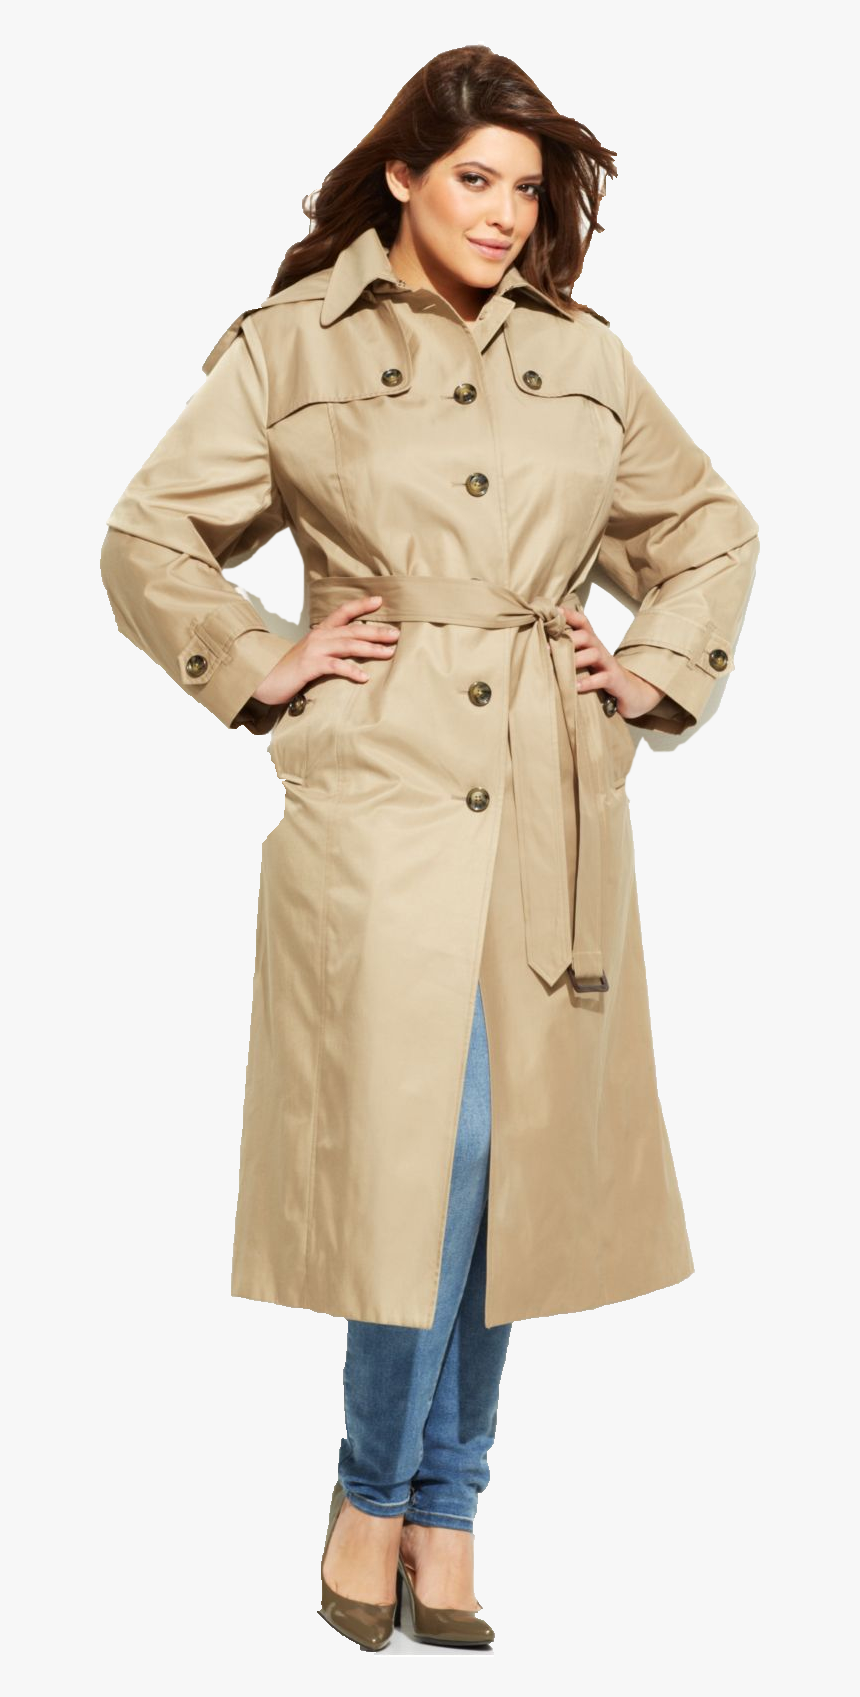 Trench Coat Png Image Download, Transparent Png, Free Download